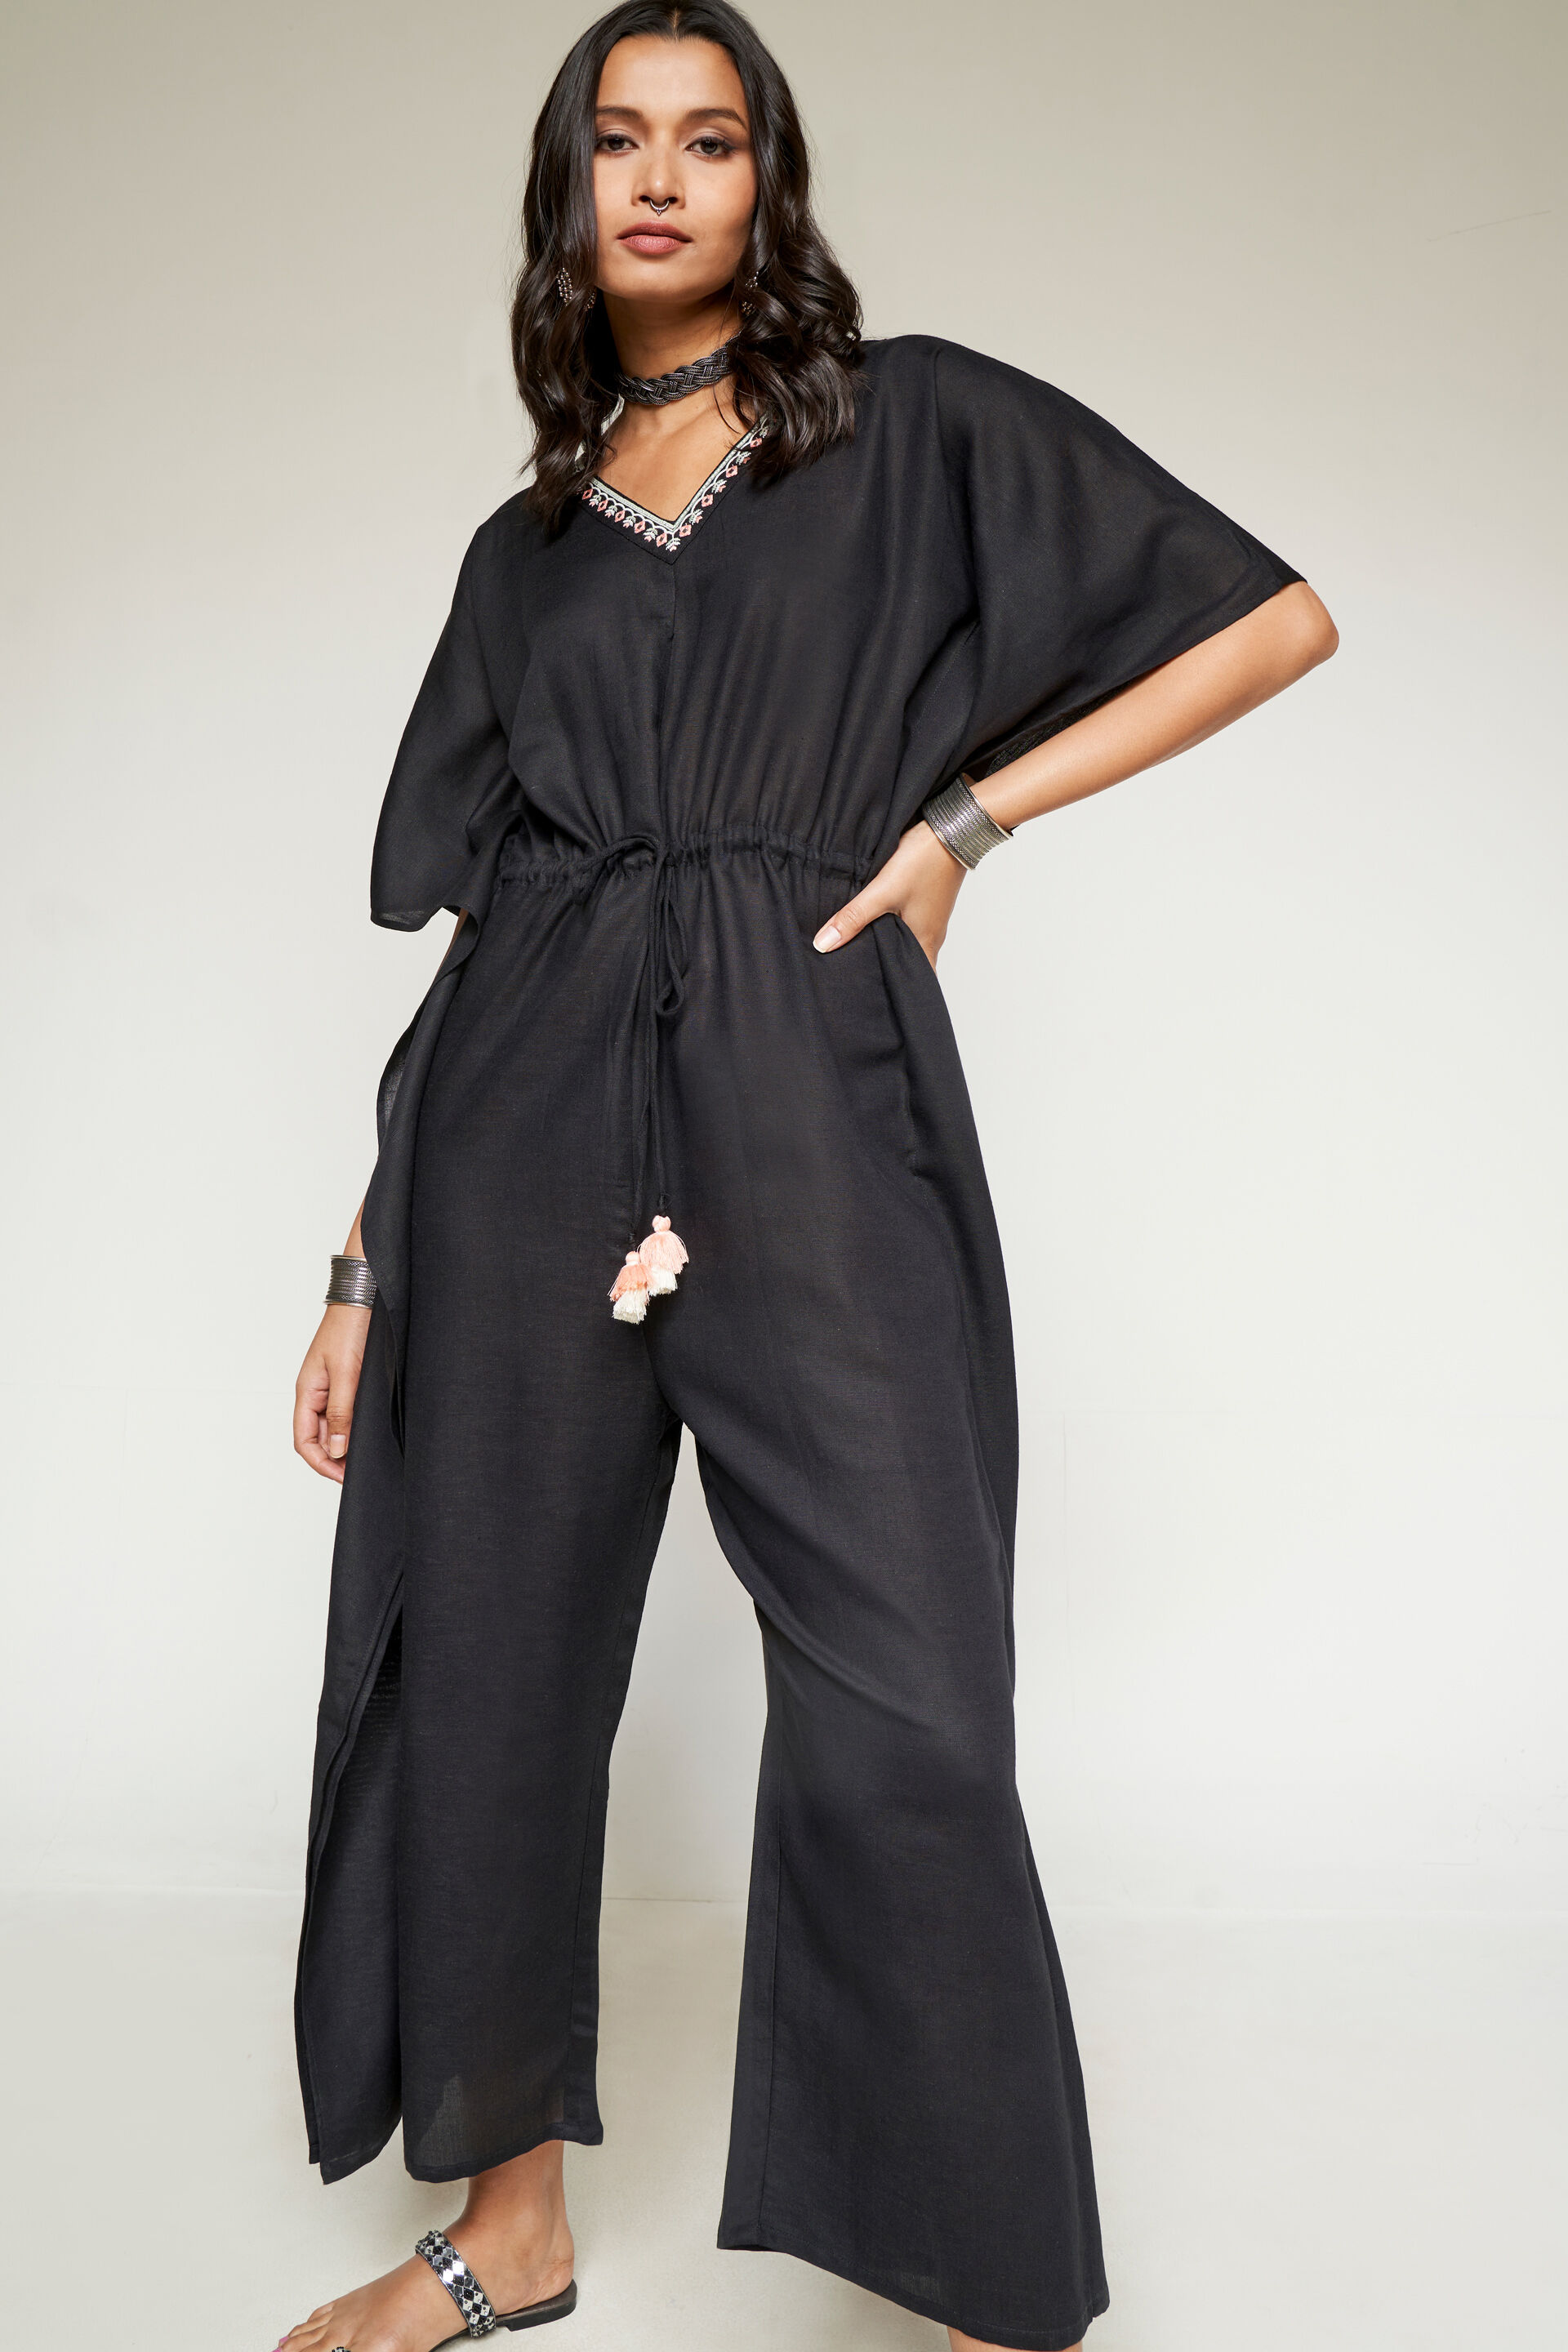 Black jumpsuit with golden embellishment – Looks By Aswani